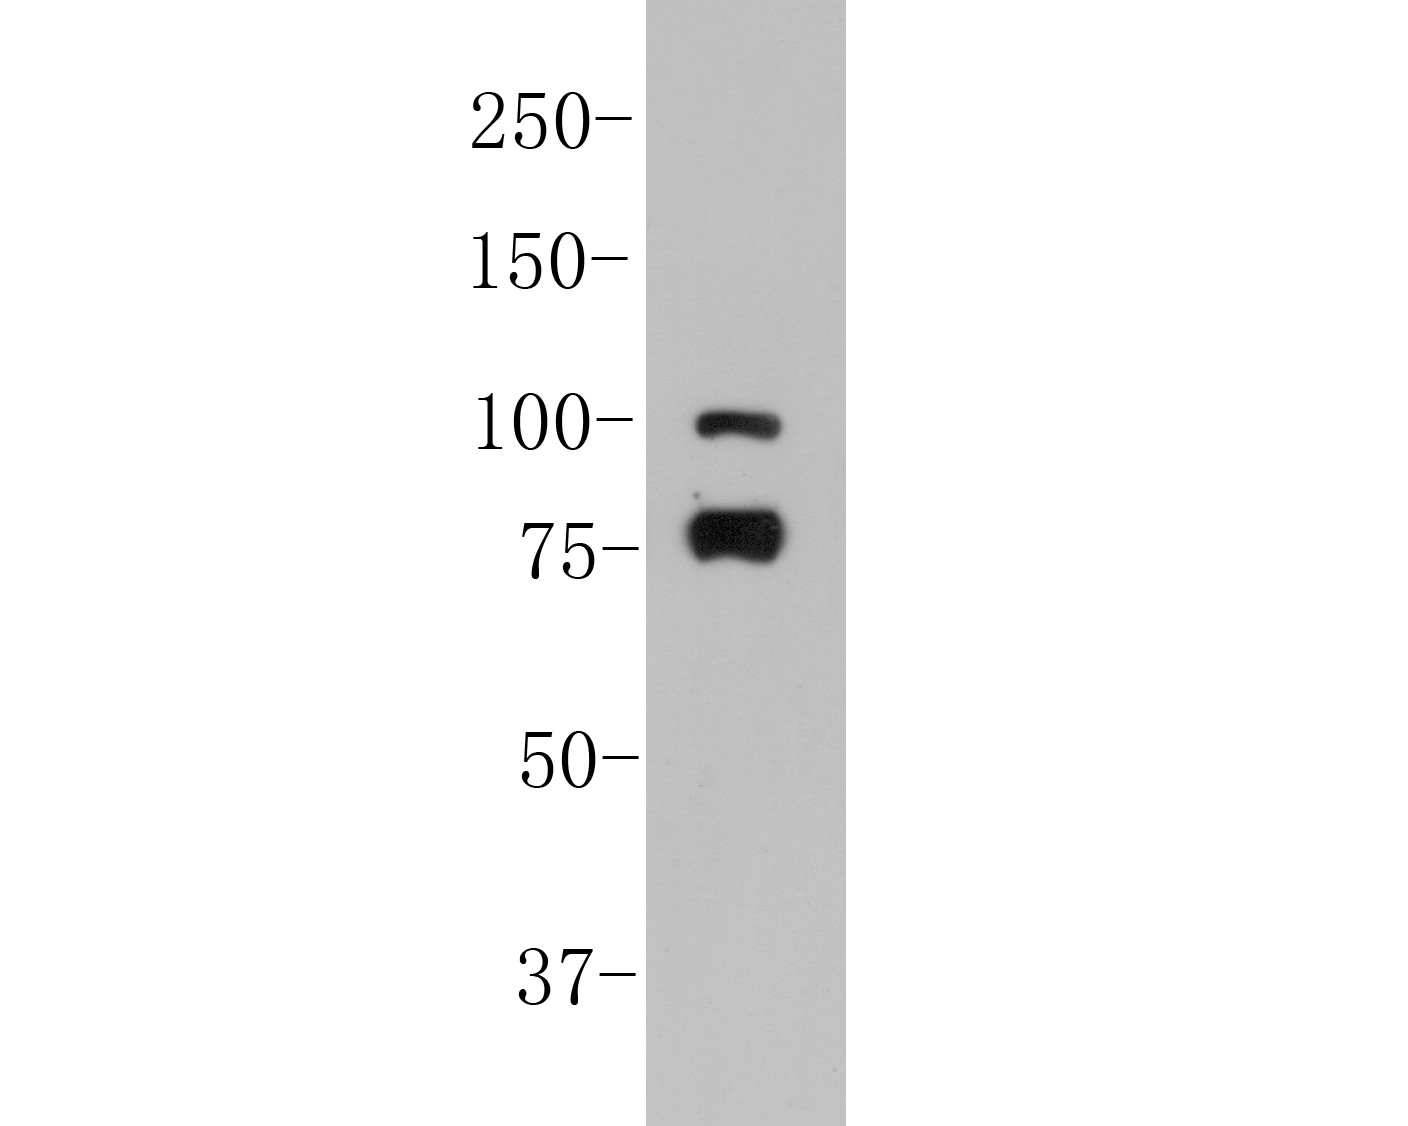 Fig1:; Western blot analysis of SPATA5L1 on K562 cell lysates. Proteins were transferred to a PVDF membrane and blocked with 5% BSA in PBS for 1 hour at room temperature. The primary antibody ( 1/500) was used in 5% BSA at room temperature for 2 hours. Goat Anti-Rabbit IgG - HRP Secondary Antibody (HA1001) at 1:5,000 dilution was used for 1 hour at room temperature.